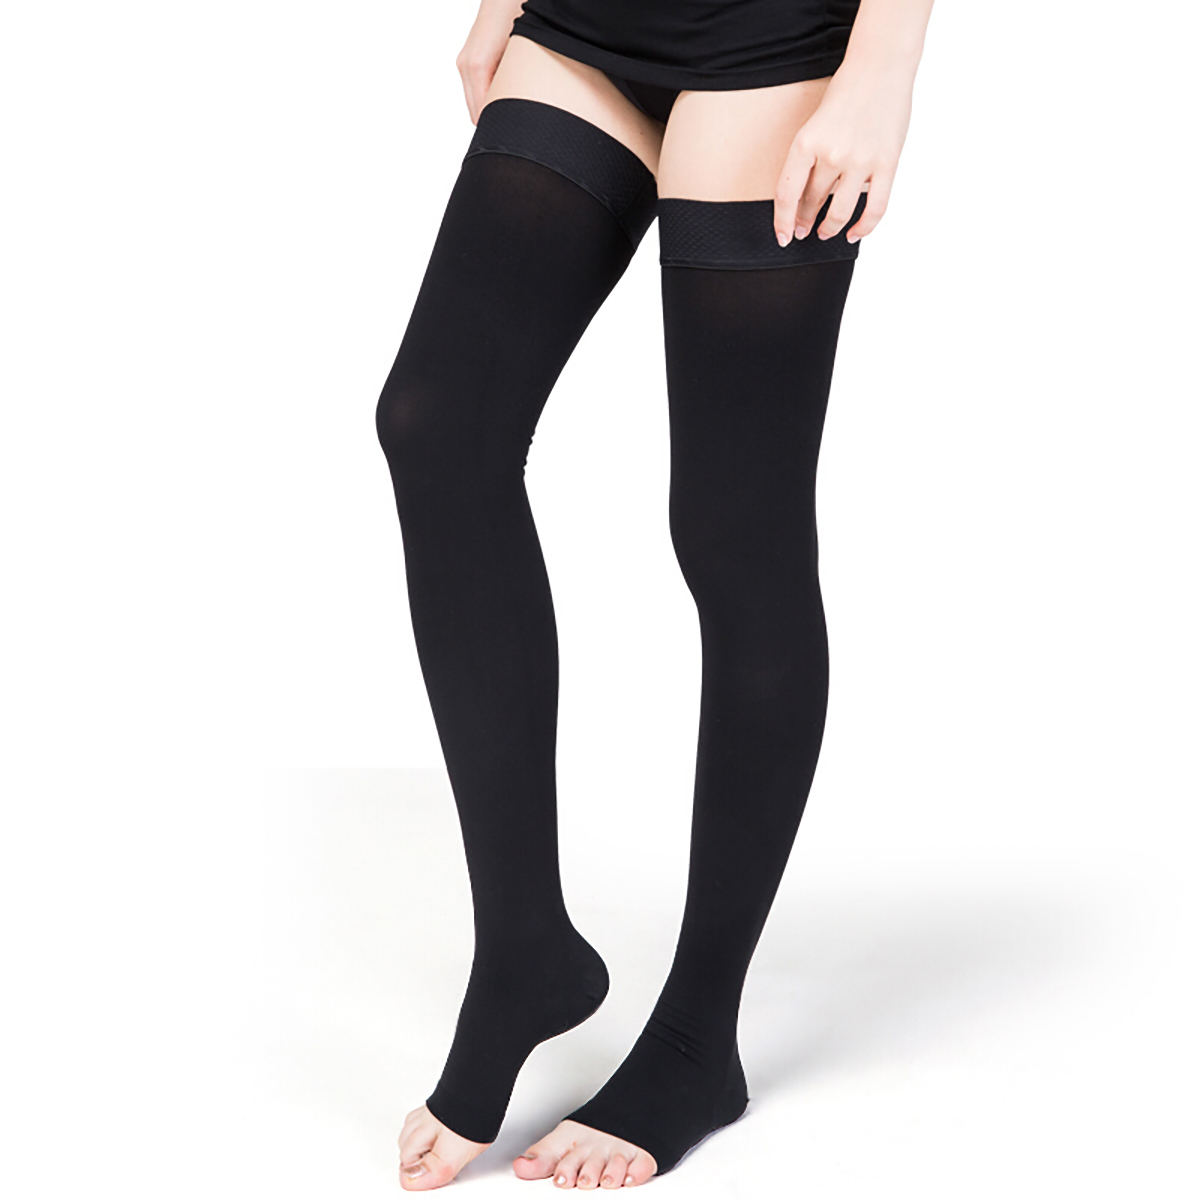  VARCOH Compression Socks for Women, Compression Leggings for  Women, Medical Compression Stockings Best for DVT, Pregnancy, Varicose  Veins, Relief Shin Splints, Edema : Clothing, Shoes & Jewelry